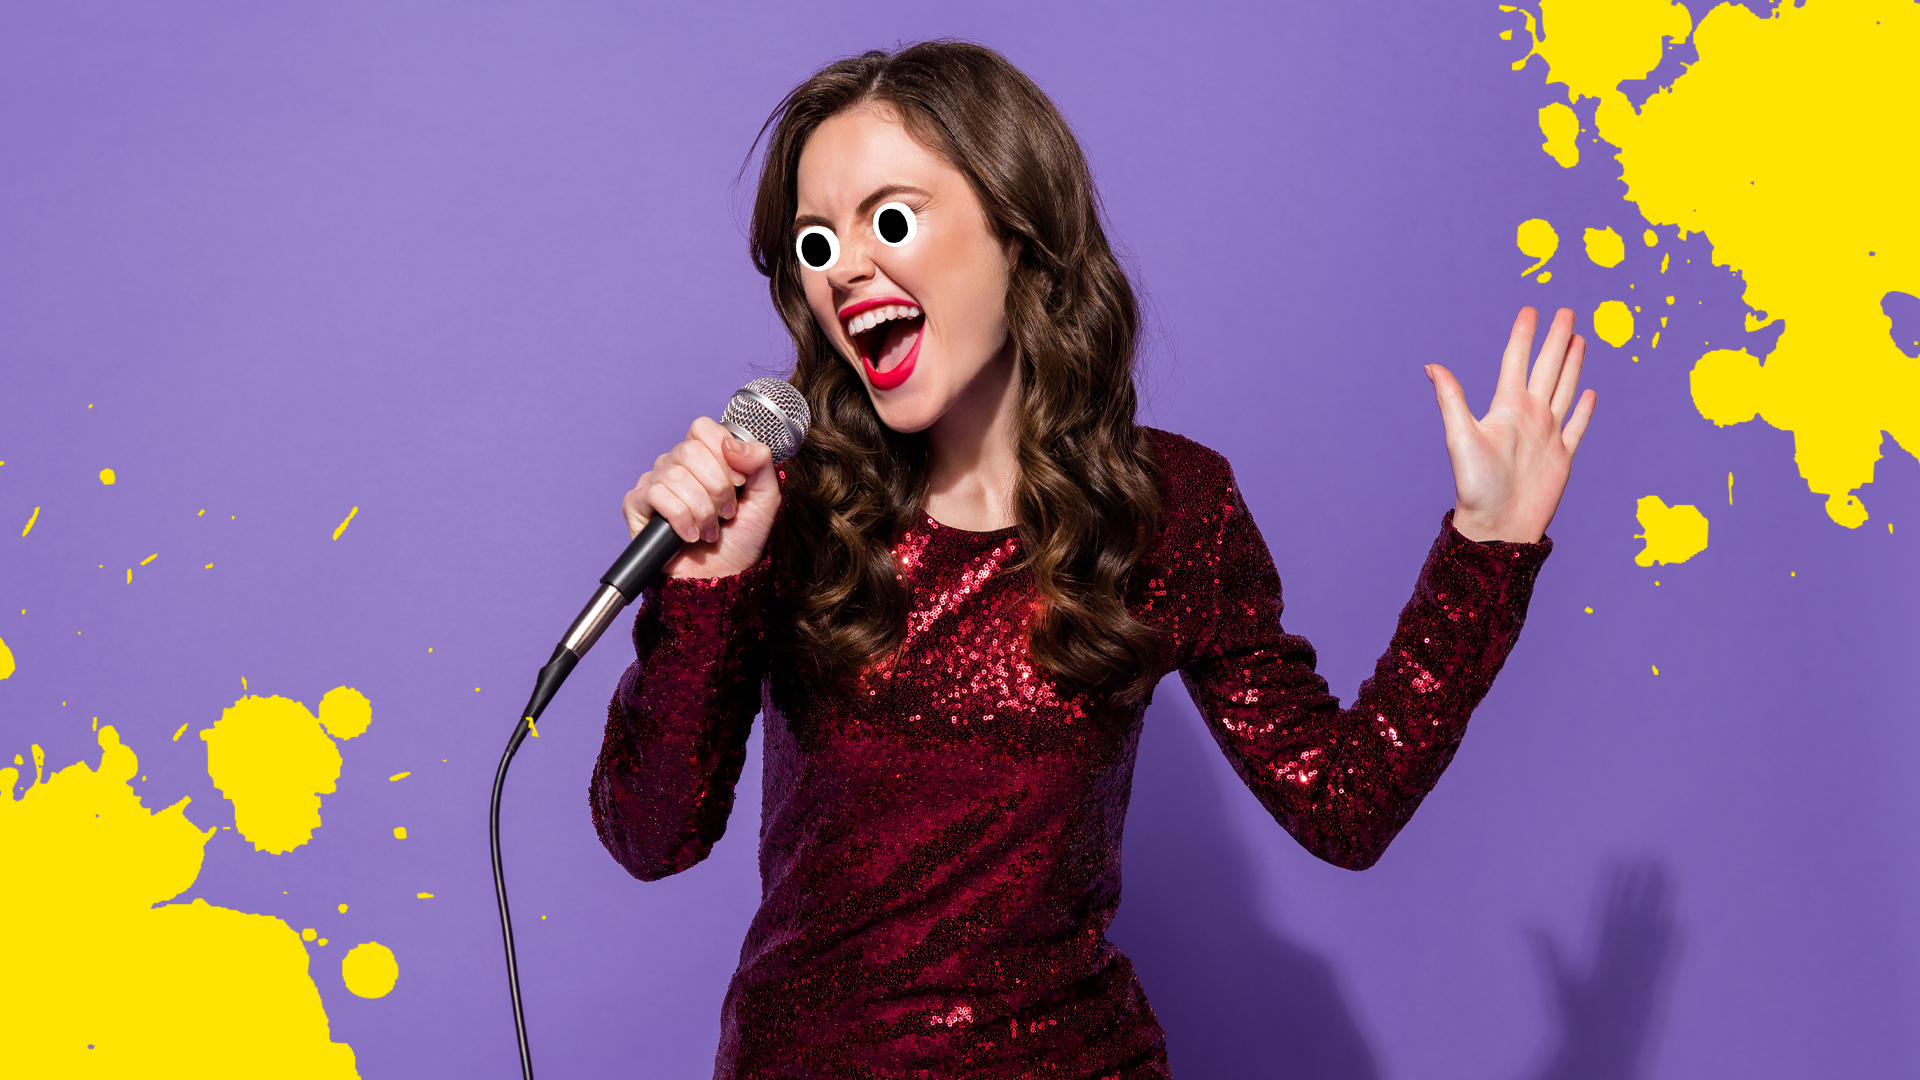 A singer on a purple background